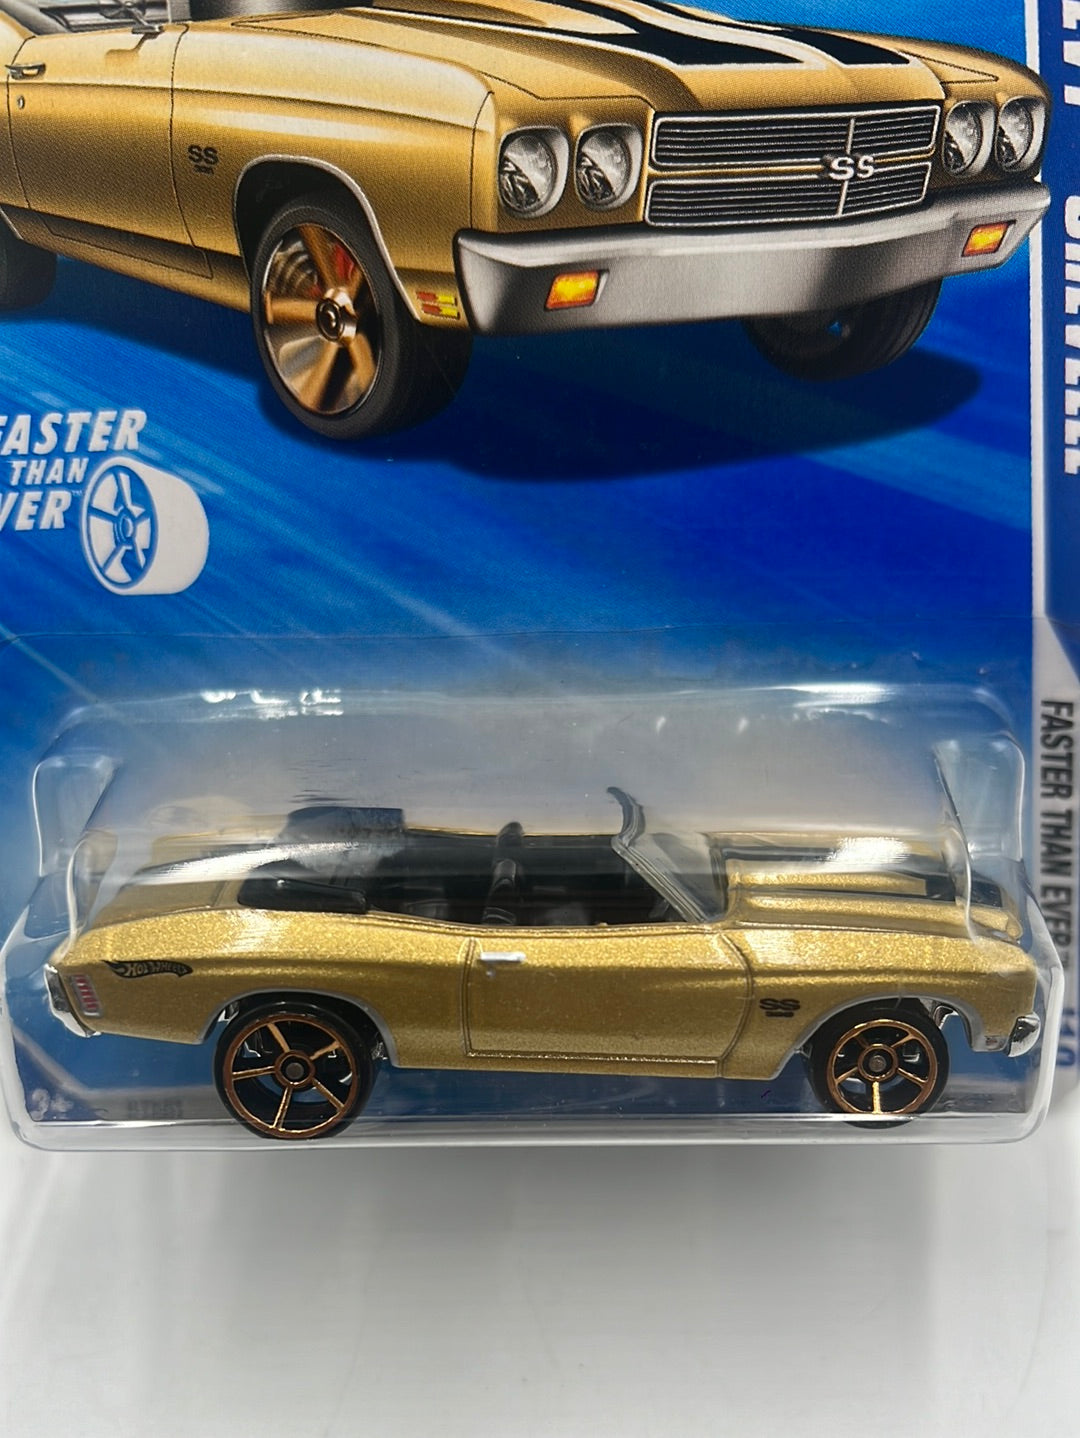 2010 Hot Wheels Faster Than Ever ‘70 Chevy Chevelle Gold 136/240 2C